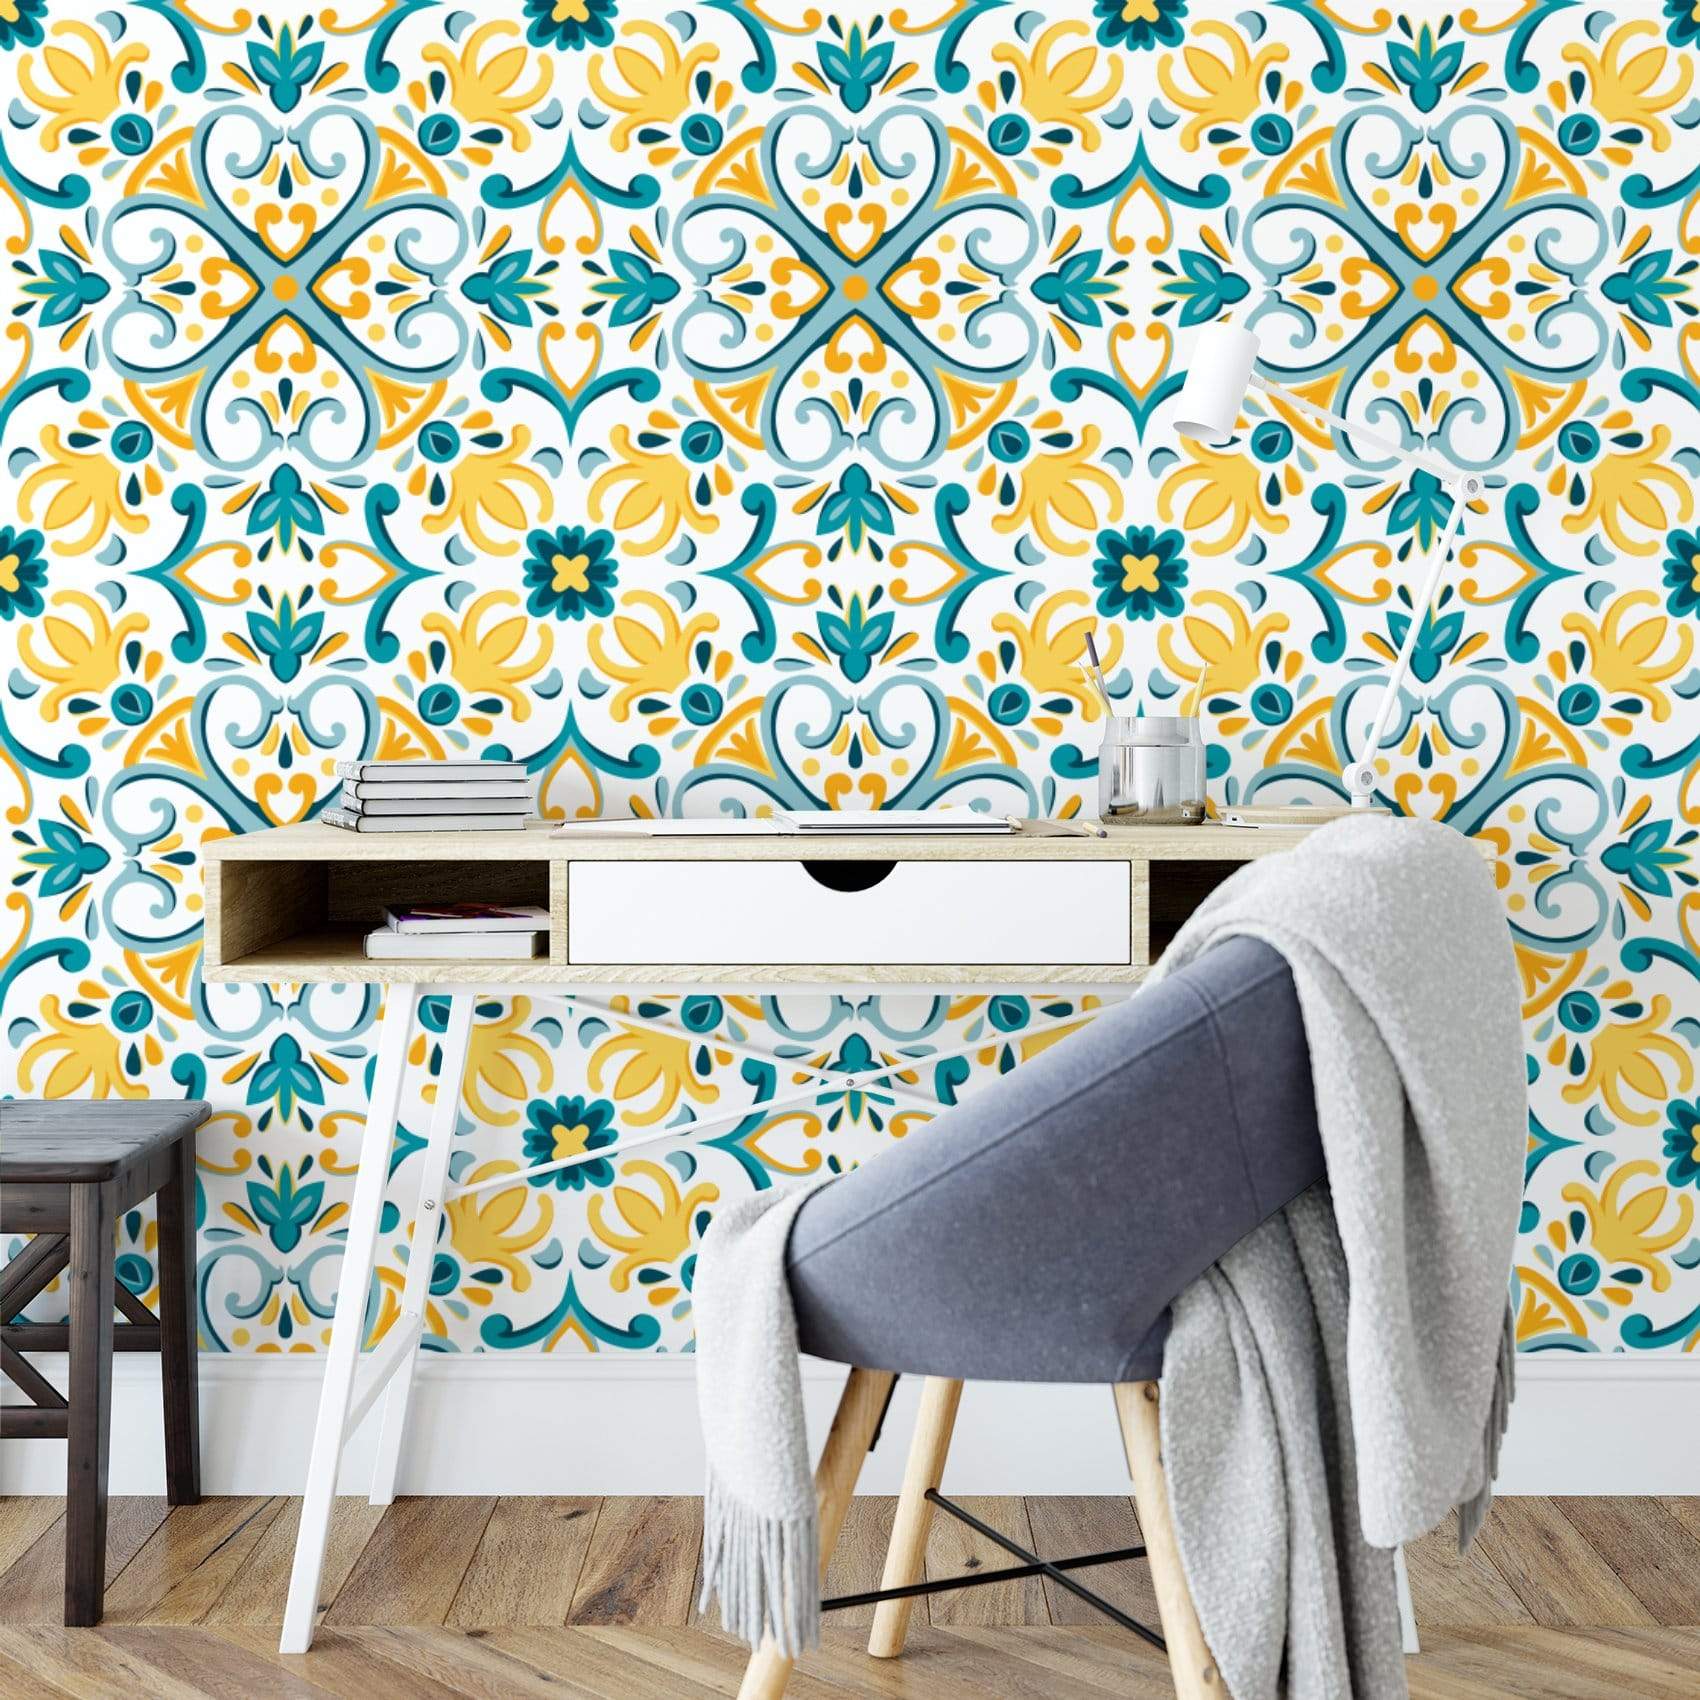 NextWall Moroccan Style Peel and Stick Mosaic Tile Wallpaper Blue Copper   Grey  Amazonin Home Improvement